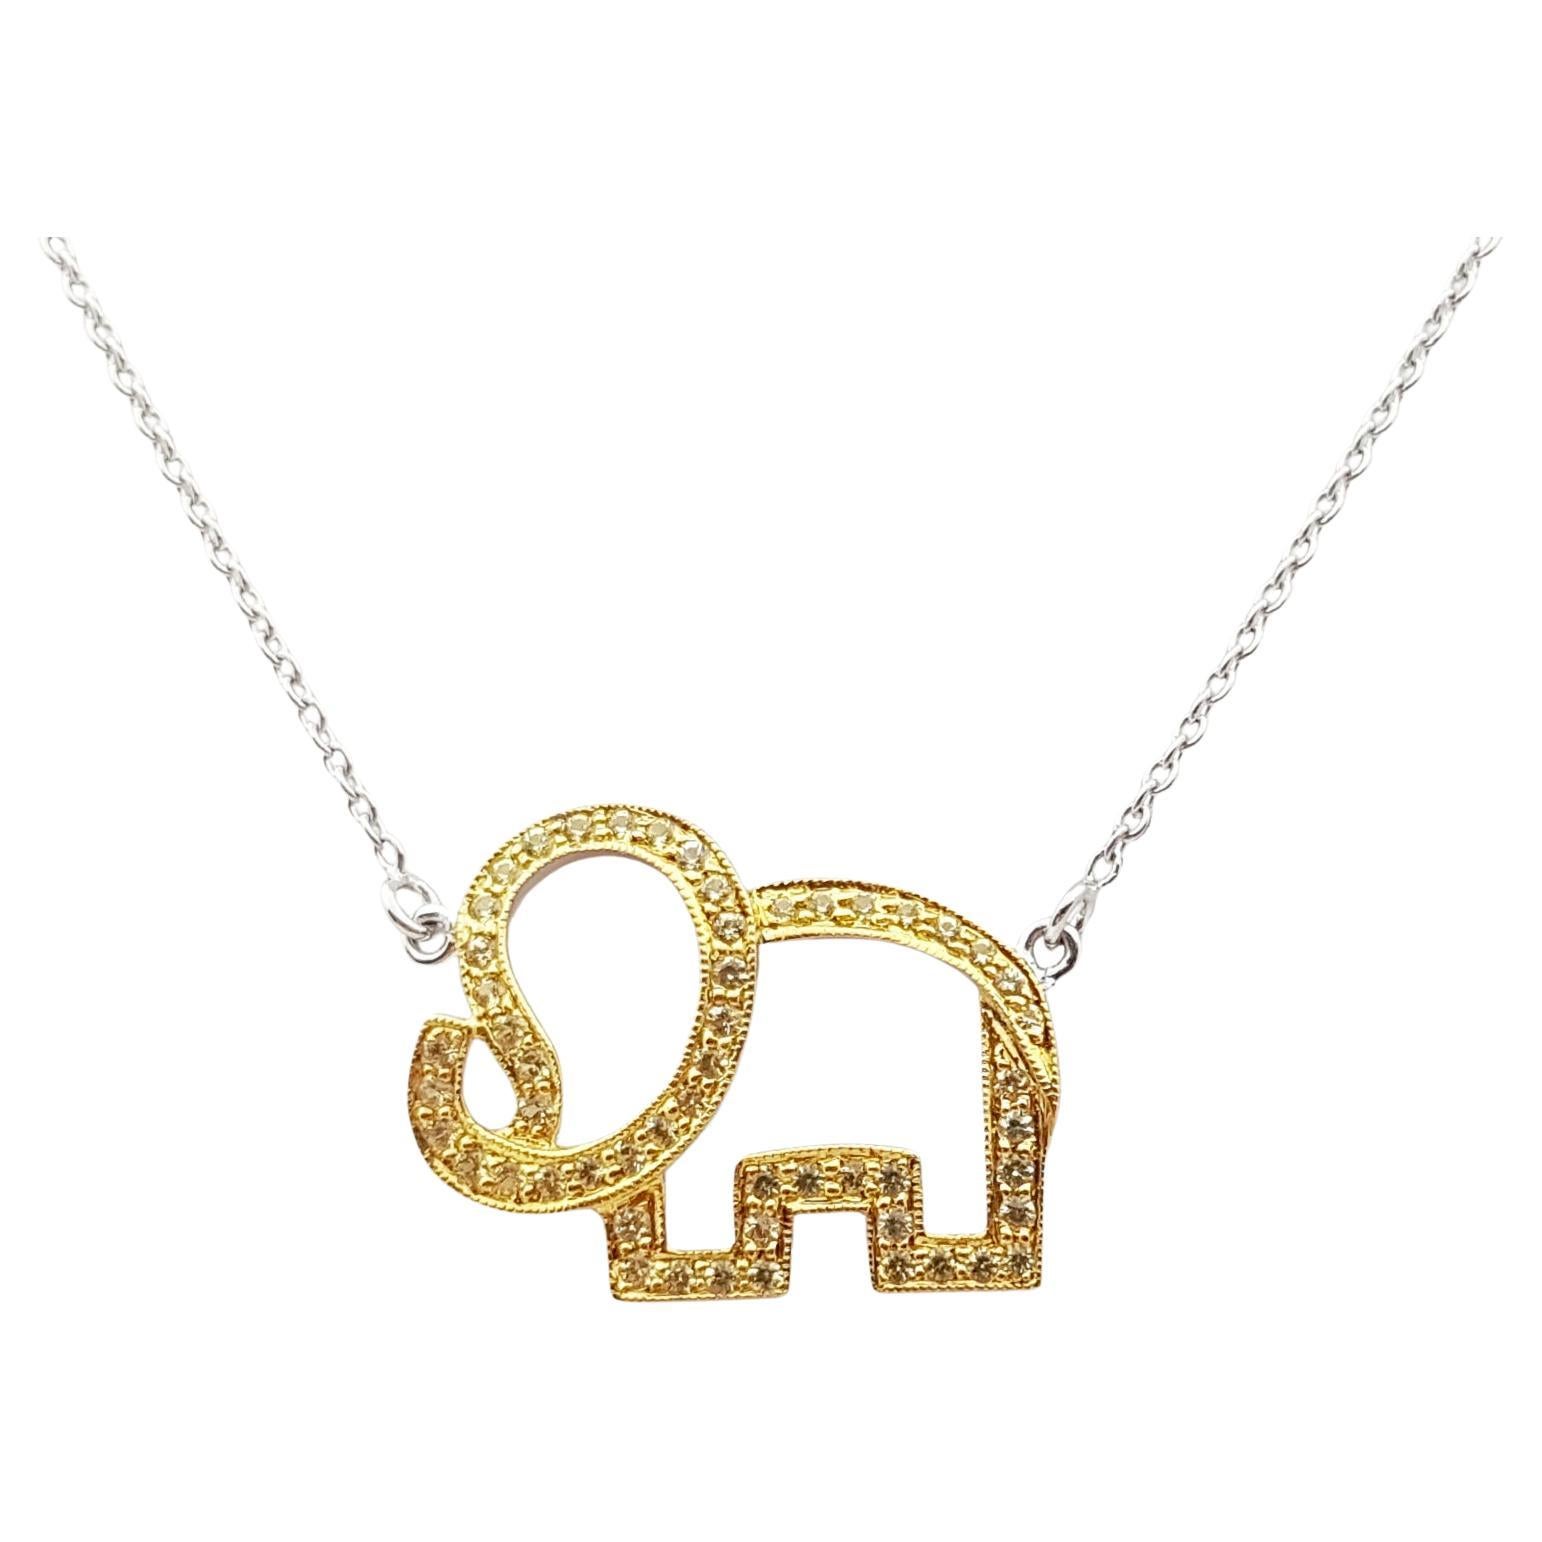 Yellow Sapphire Elephant Necklace set in Silver Settings